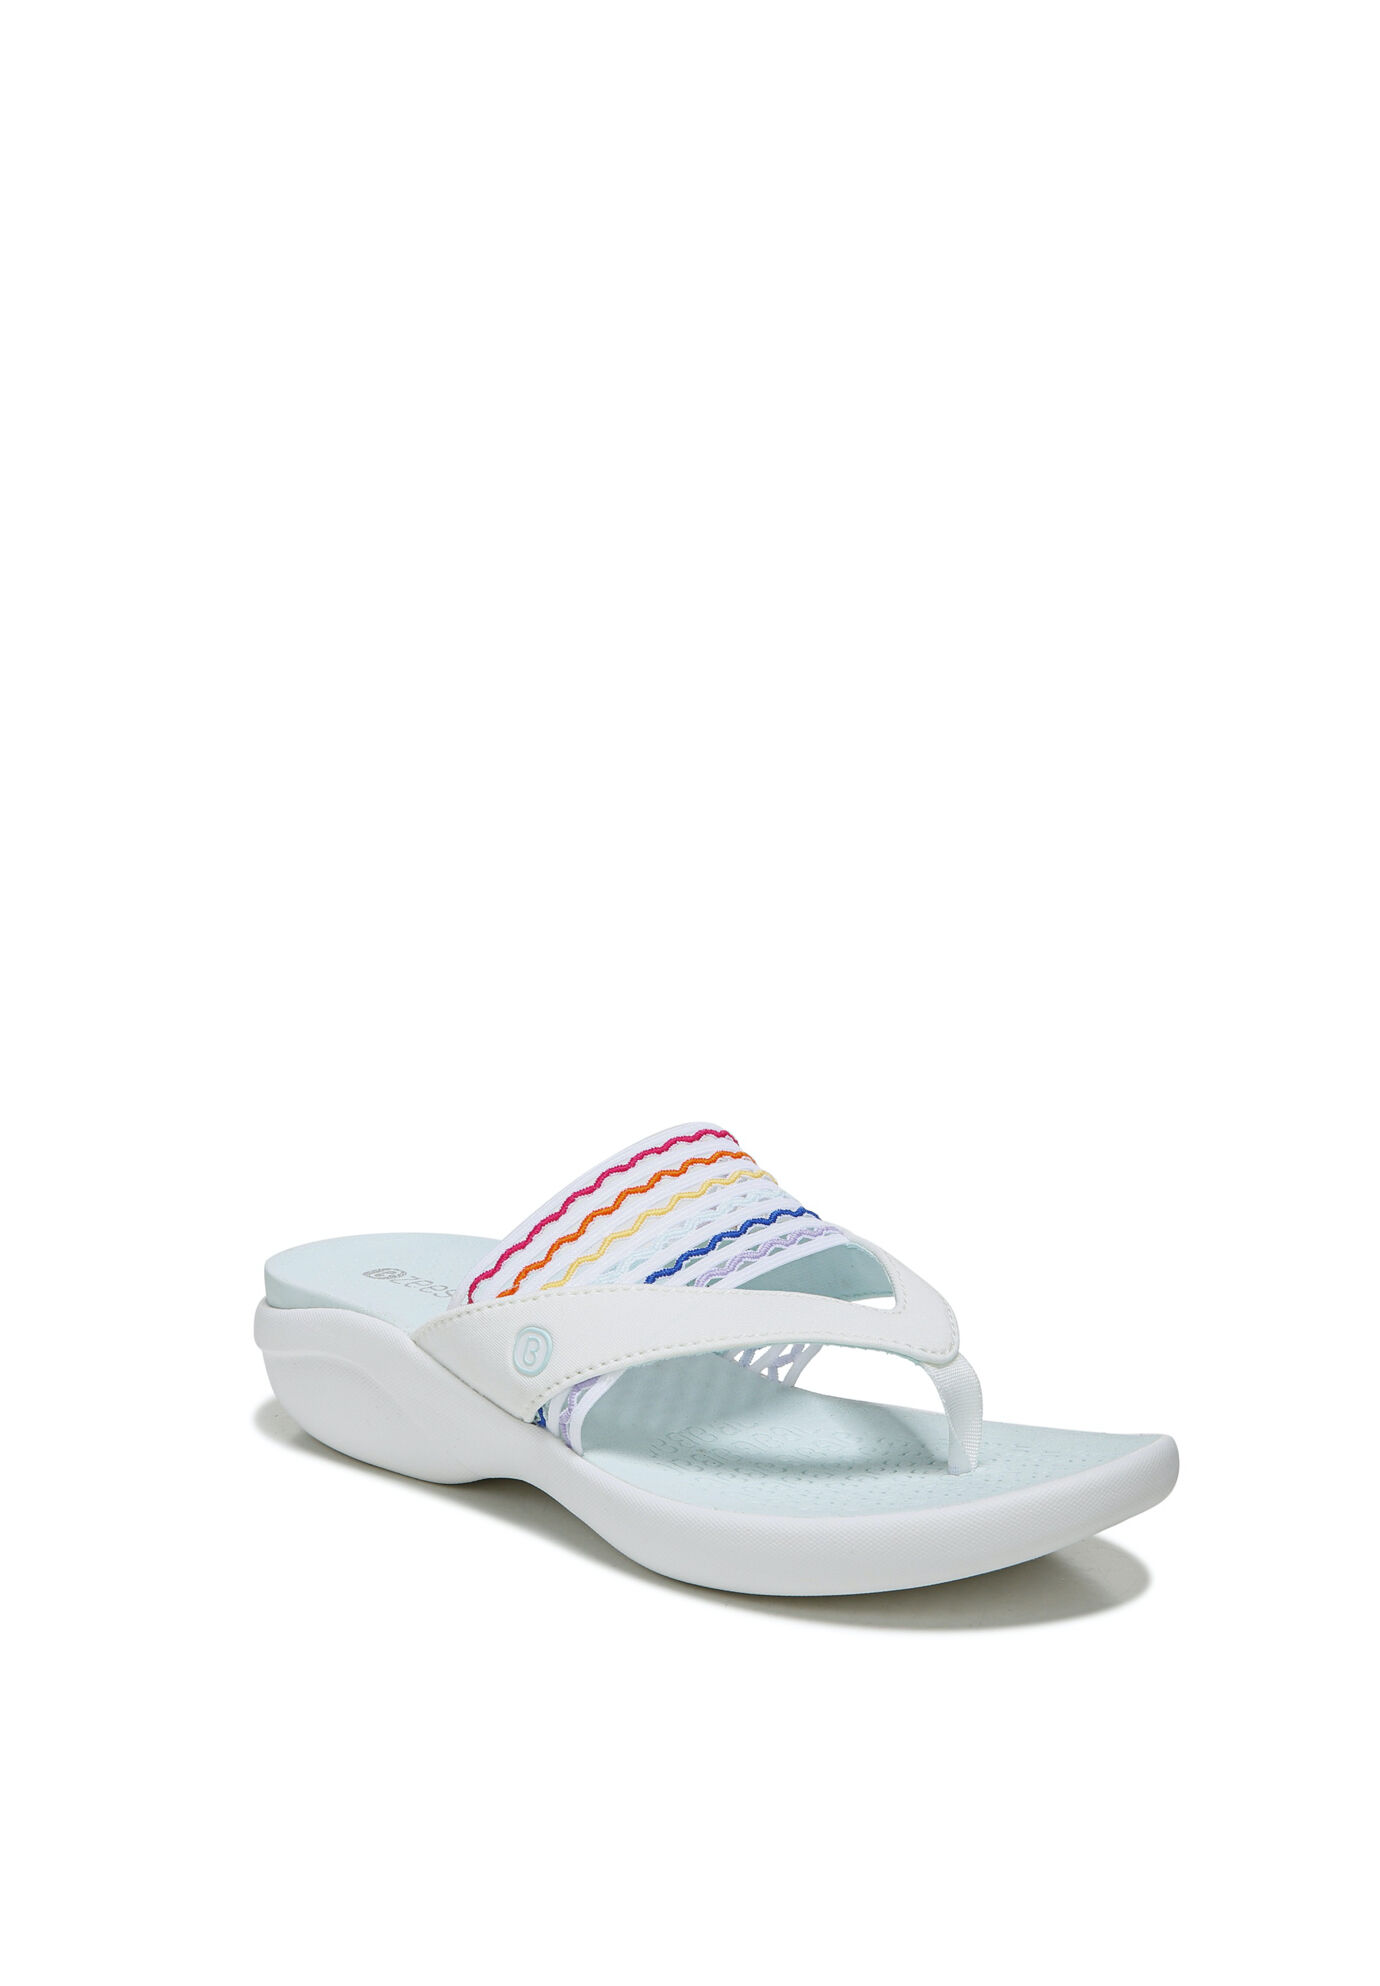 Wide Width Women's Cabana Sandals by BZees in White (Size 8 1/2 W)